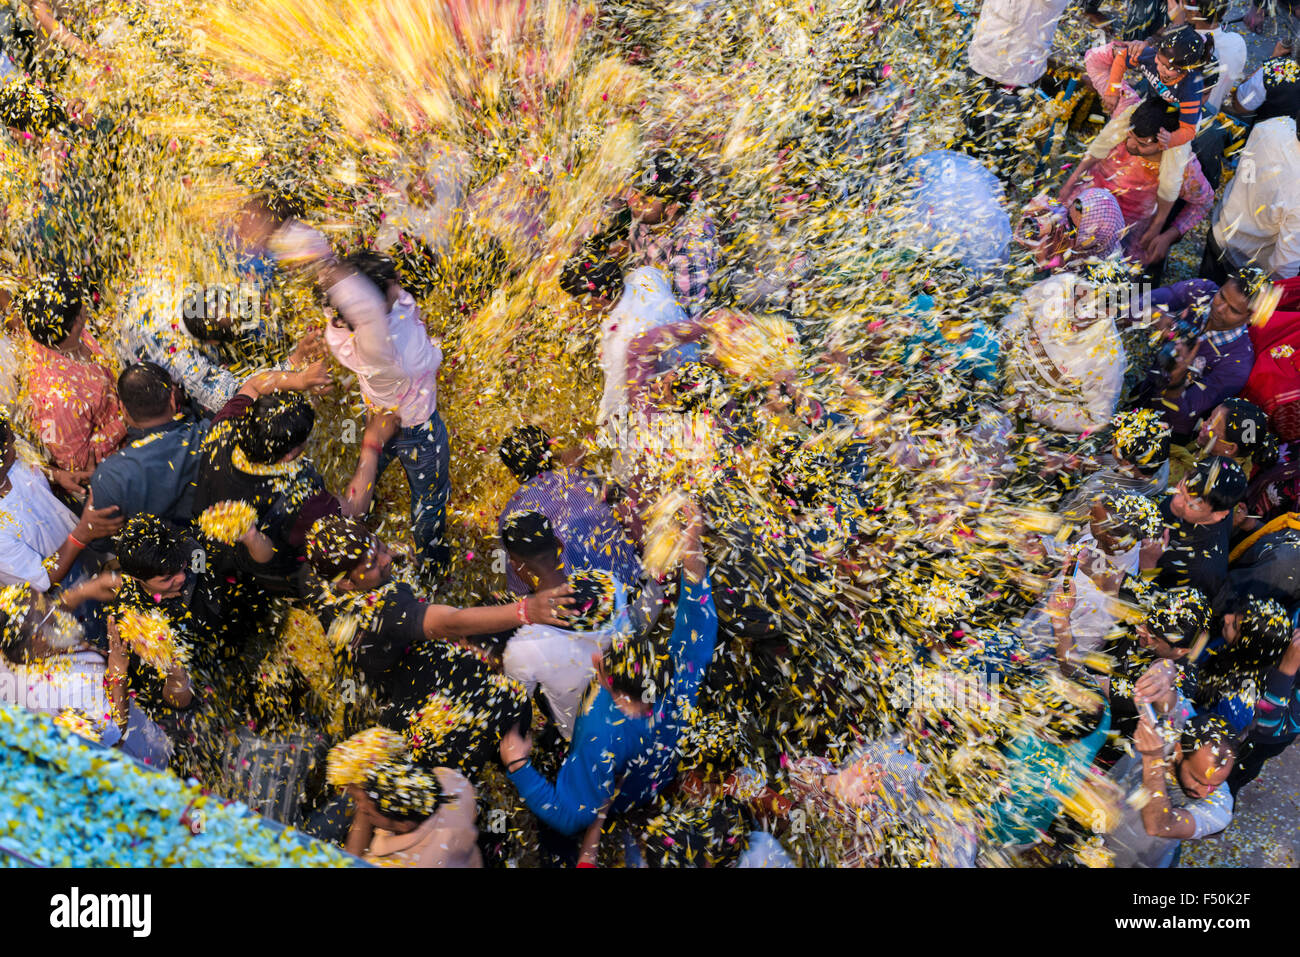 Many pilgrims, women and men, are celebrating a ritual, pooja, by throwing flowers in the air on the ghats at the holy river Yam Stock Photo